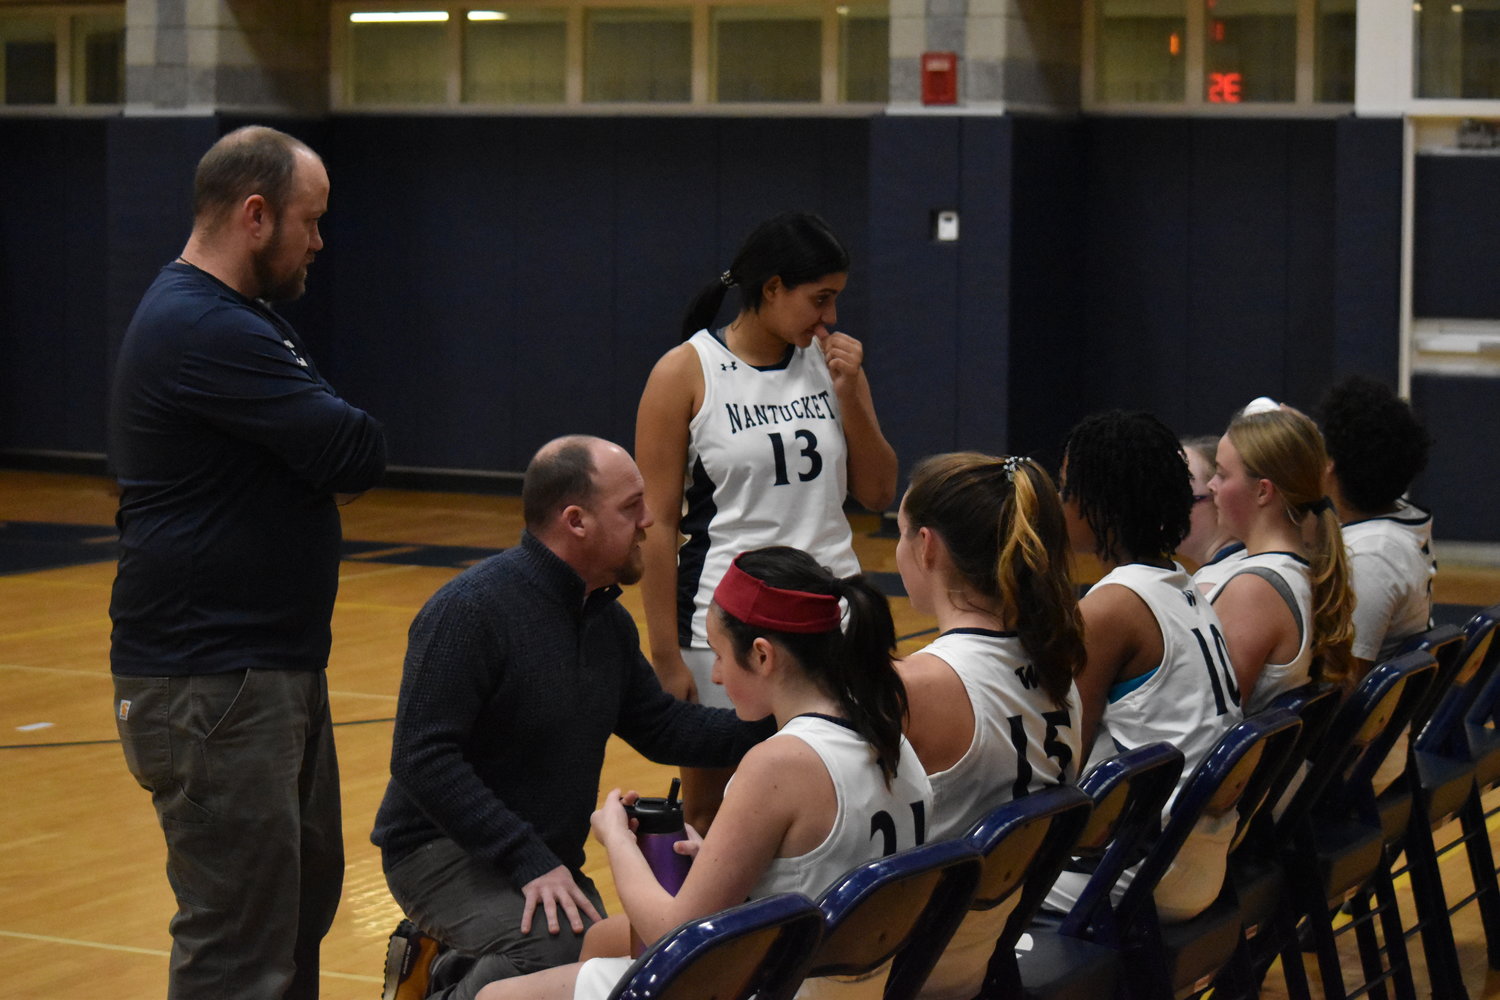 The JV girls basketball team during a timeout Dec. 27 against Barnstable.